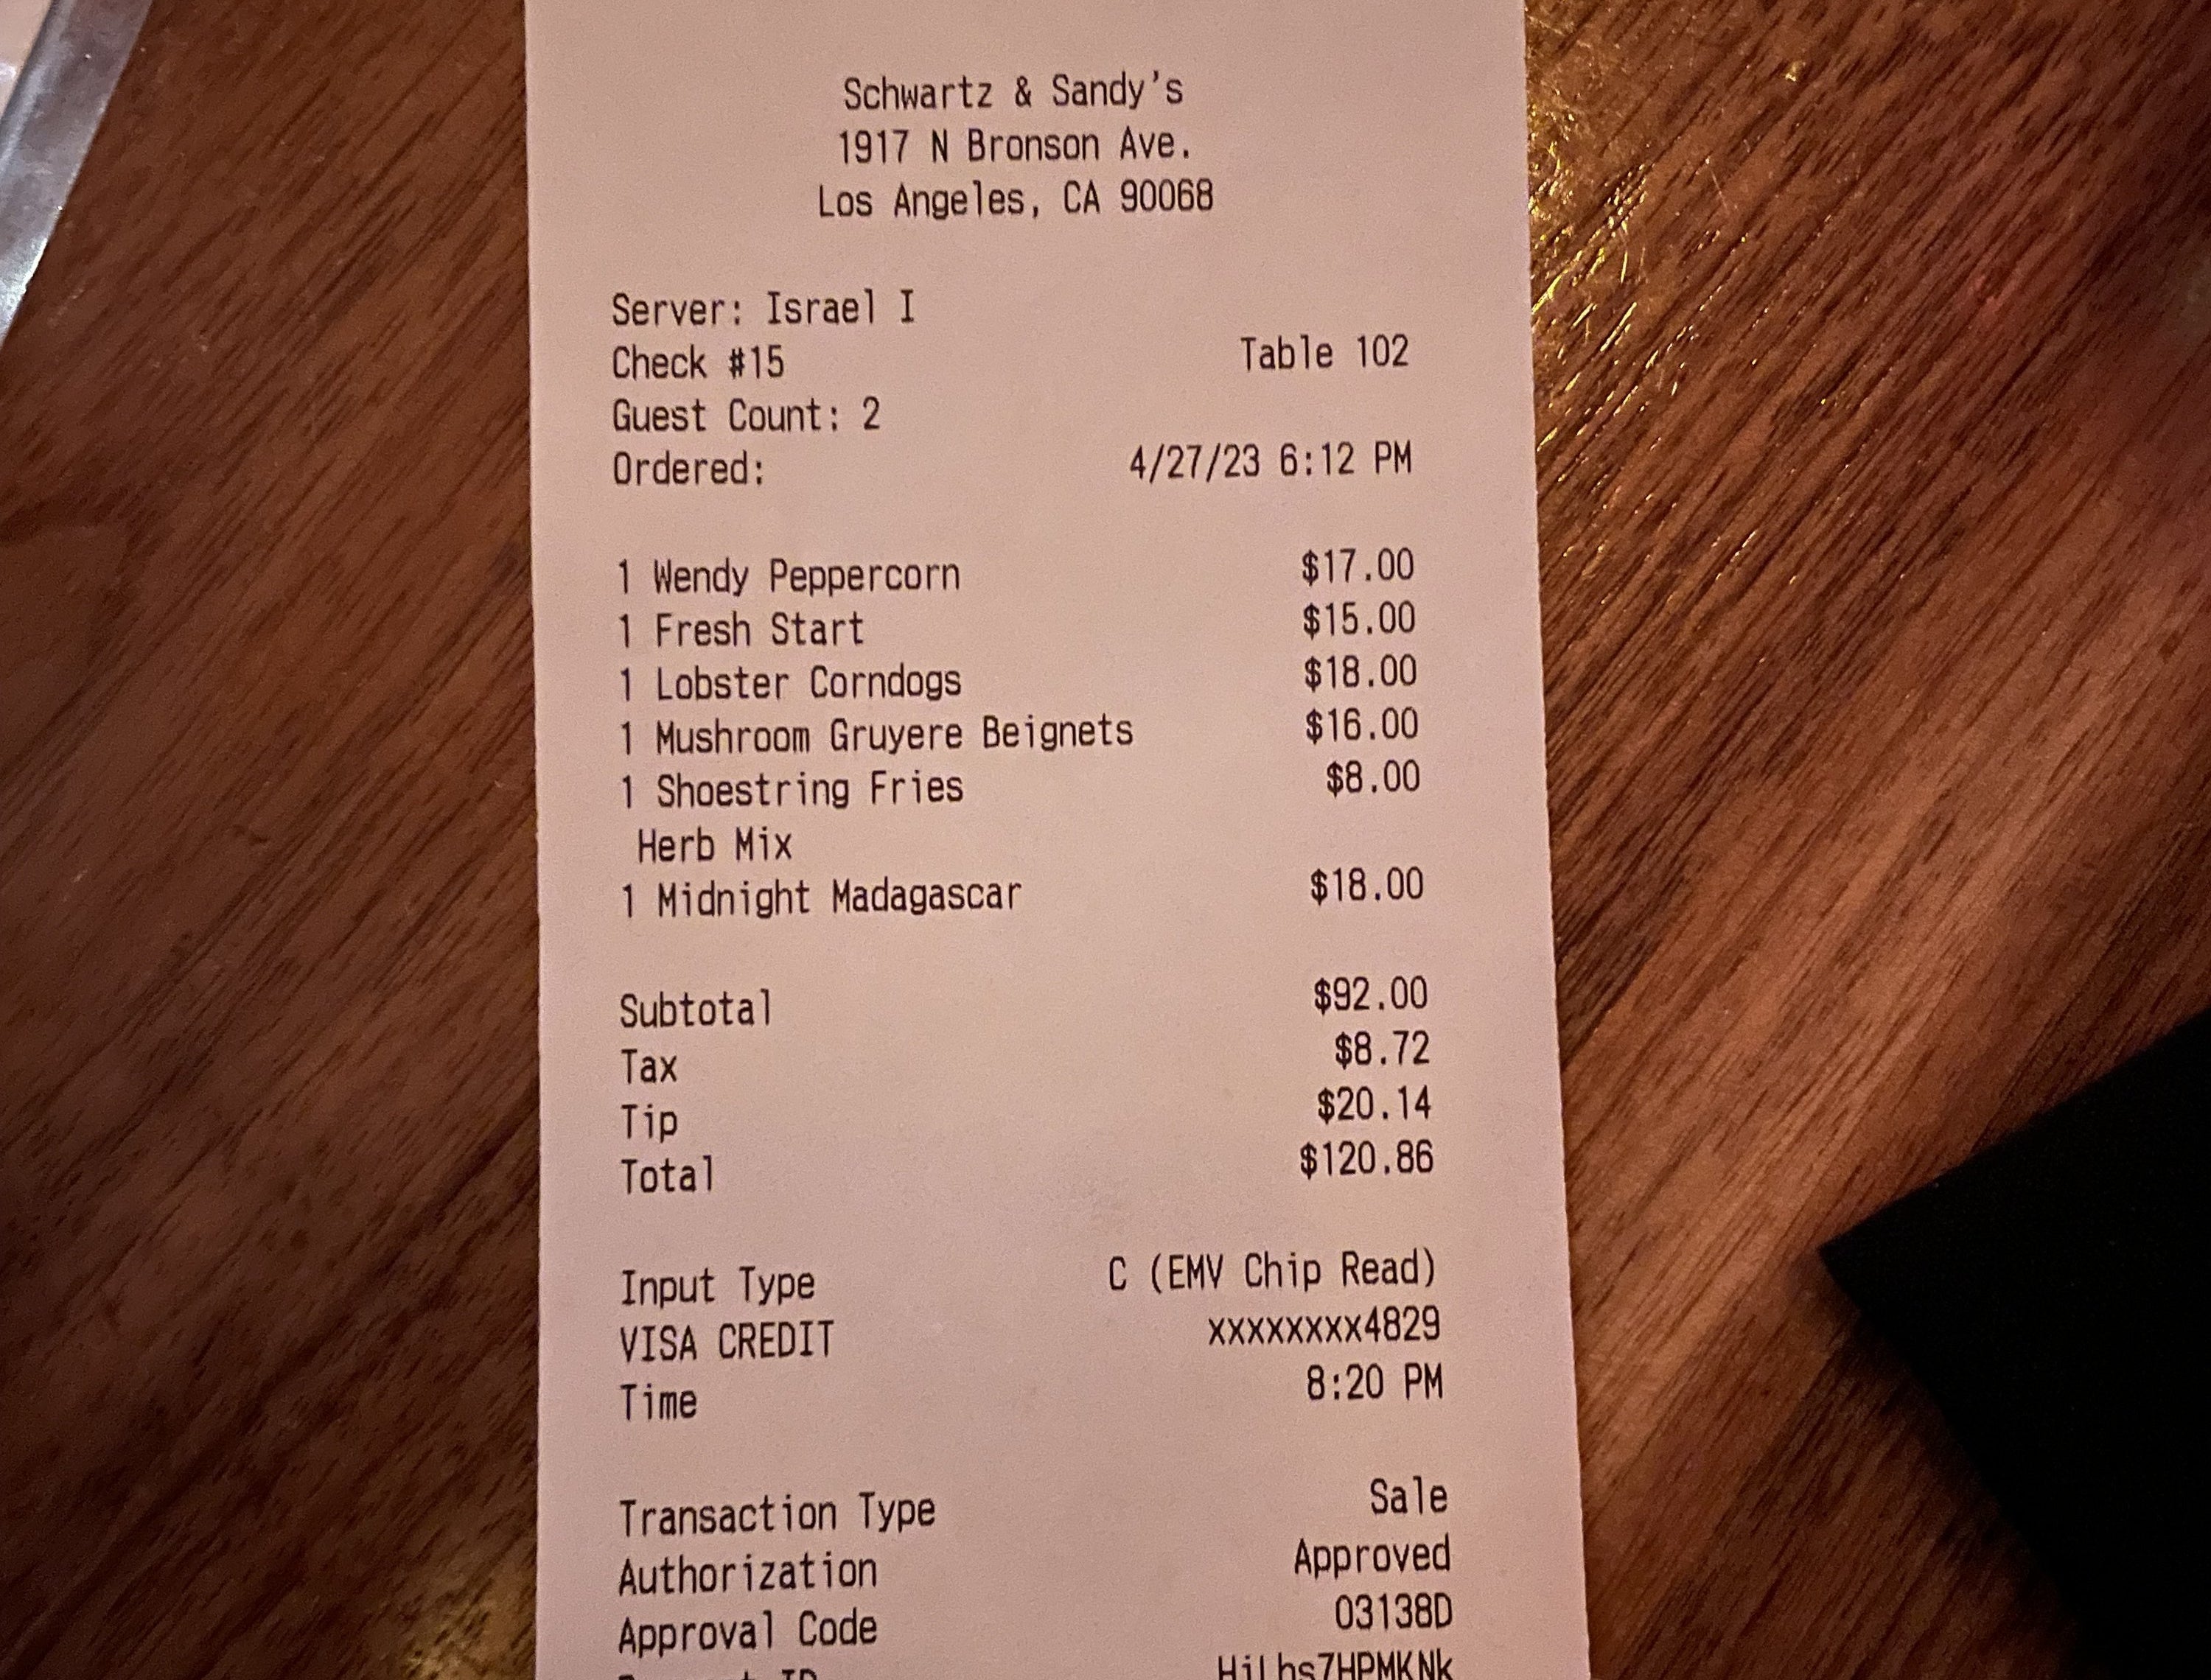 A photo of the receipt